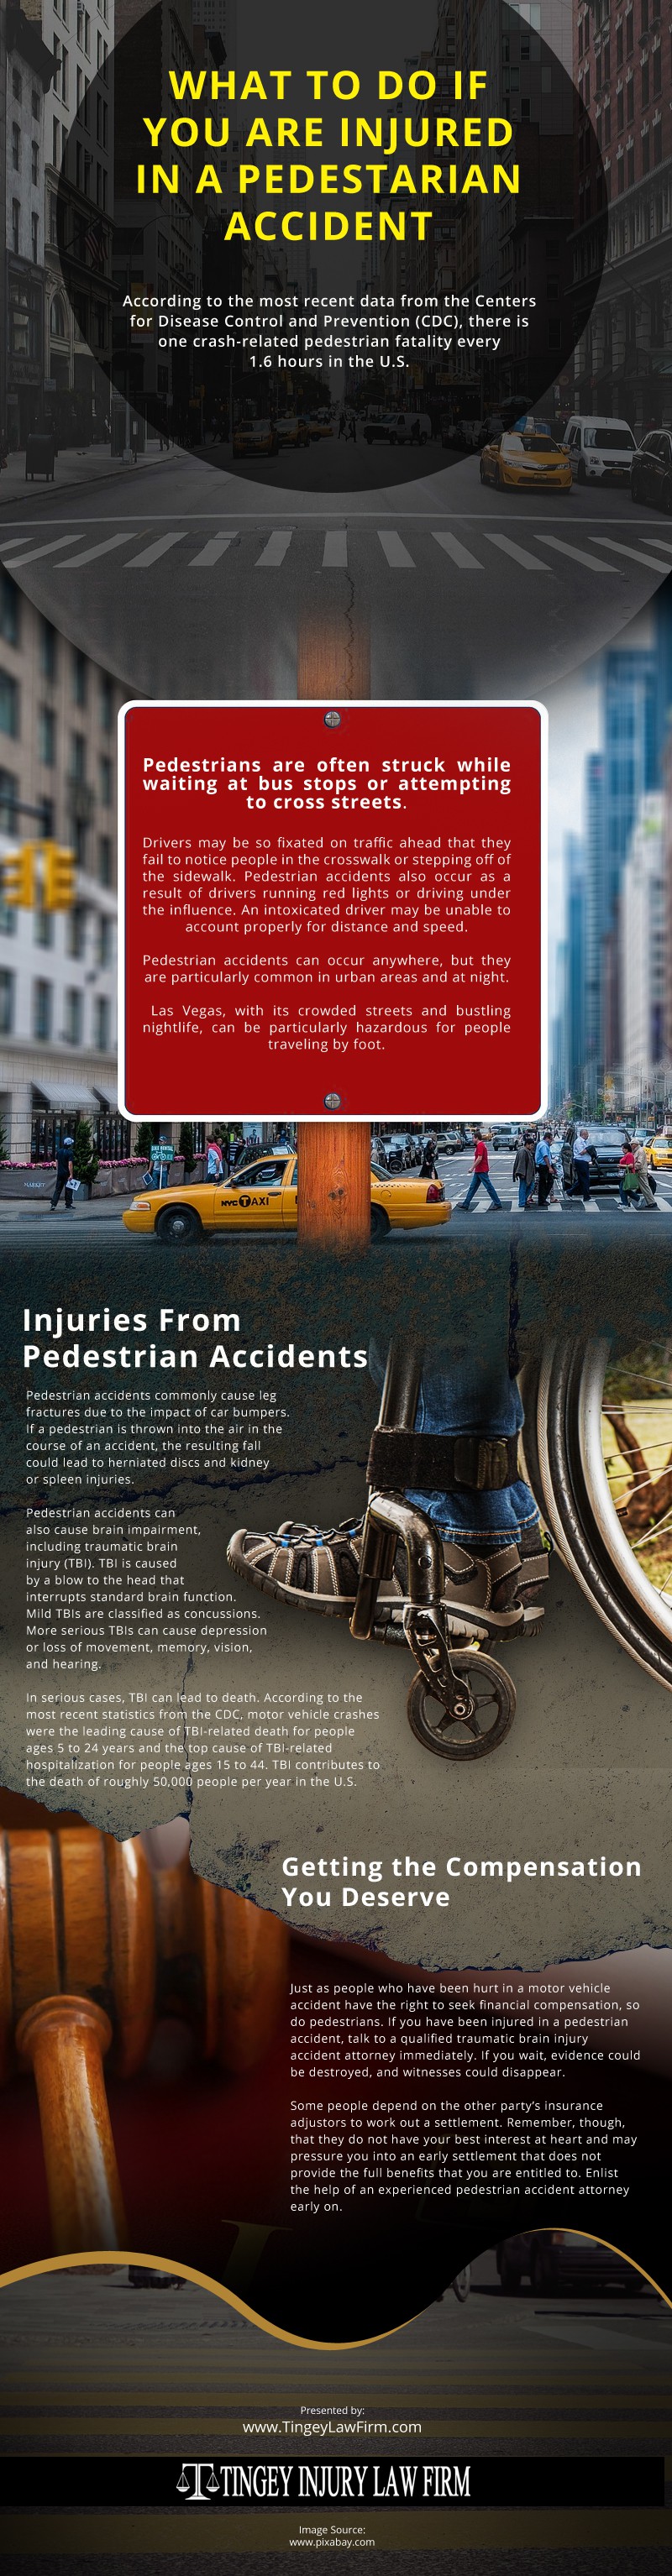 What to Do If You Are Injured in a Pedestrian Accident [infographic]